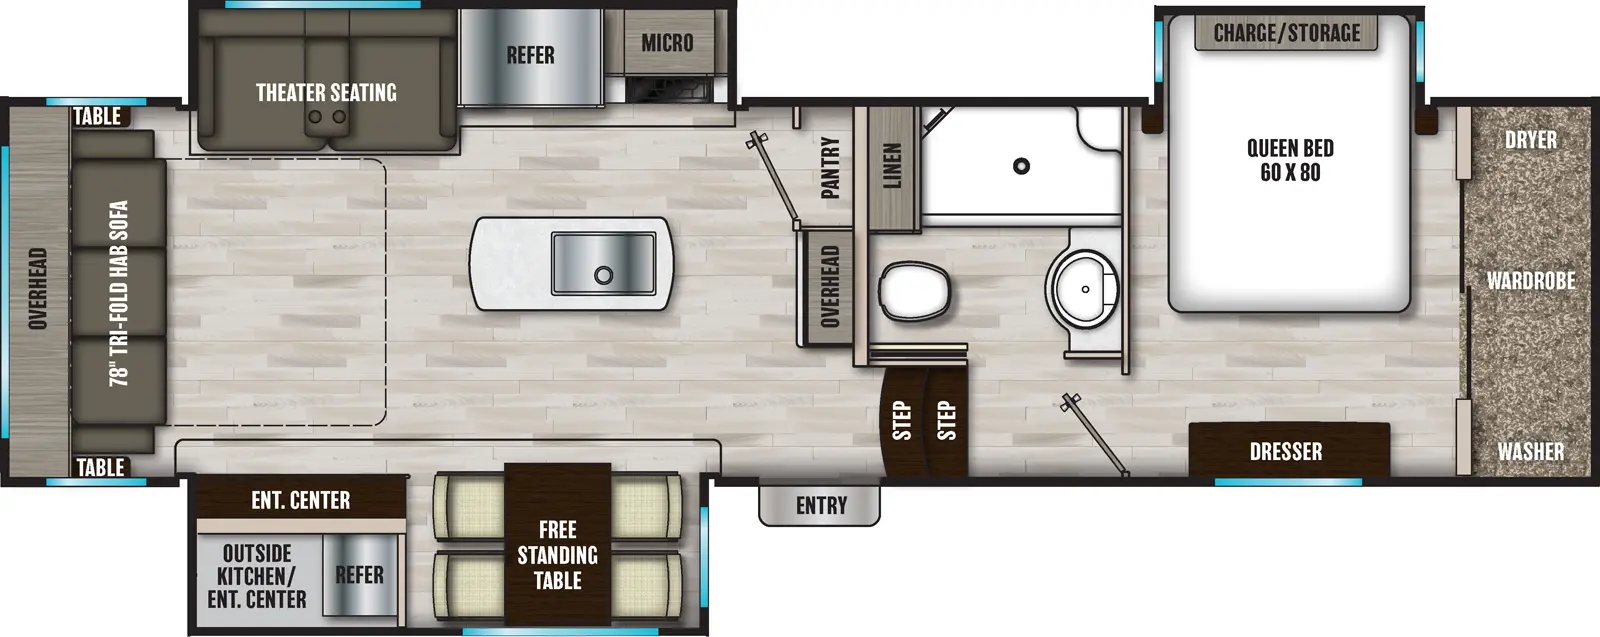 The 298RLS has three slideouts and one entry. Exterior features include an outside kitchen with entertainment center. Interior layout front to back: front bedroom with off-door side queen bed slide out, front wardrobe with washer and dryer, and door side dresser; off-door side full bathroom with linen closet; two steps down to entry door and main living area; counter with overhead cabinet and pantry along inner wall; kitchen island with sink; off-door side slideout with microwave, refrigerator, and theater seating; door side slideout with free-standing table, and entertainment center; rear tri-fold hide-a-bed sofa with overhead cabinet and tables on each side.